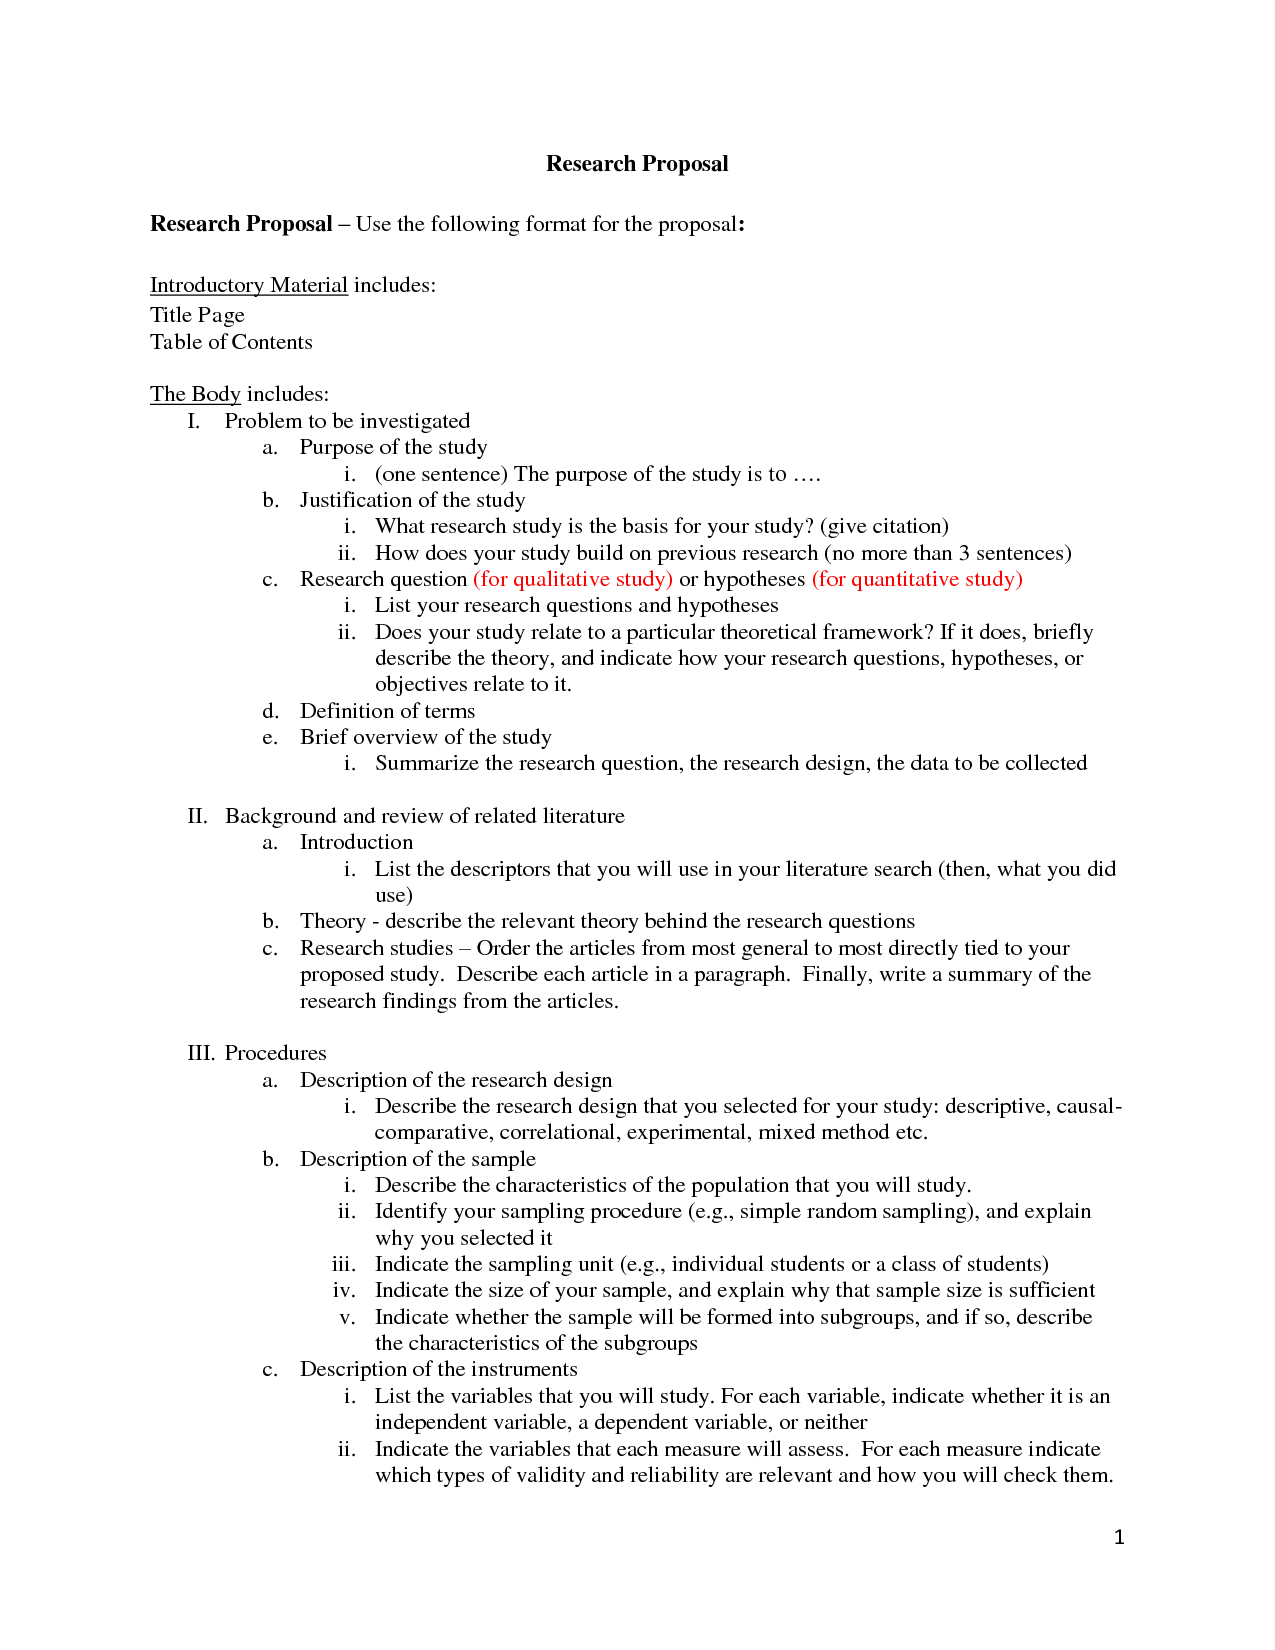 Research Proposal Example Bachelor Thesis - Examples of Research